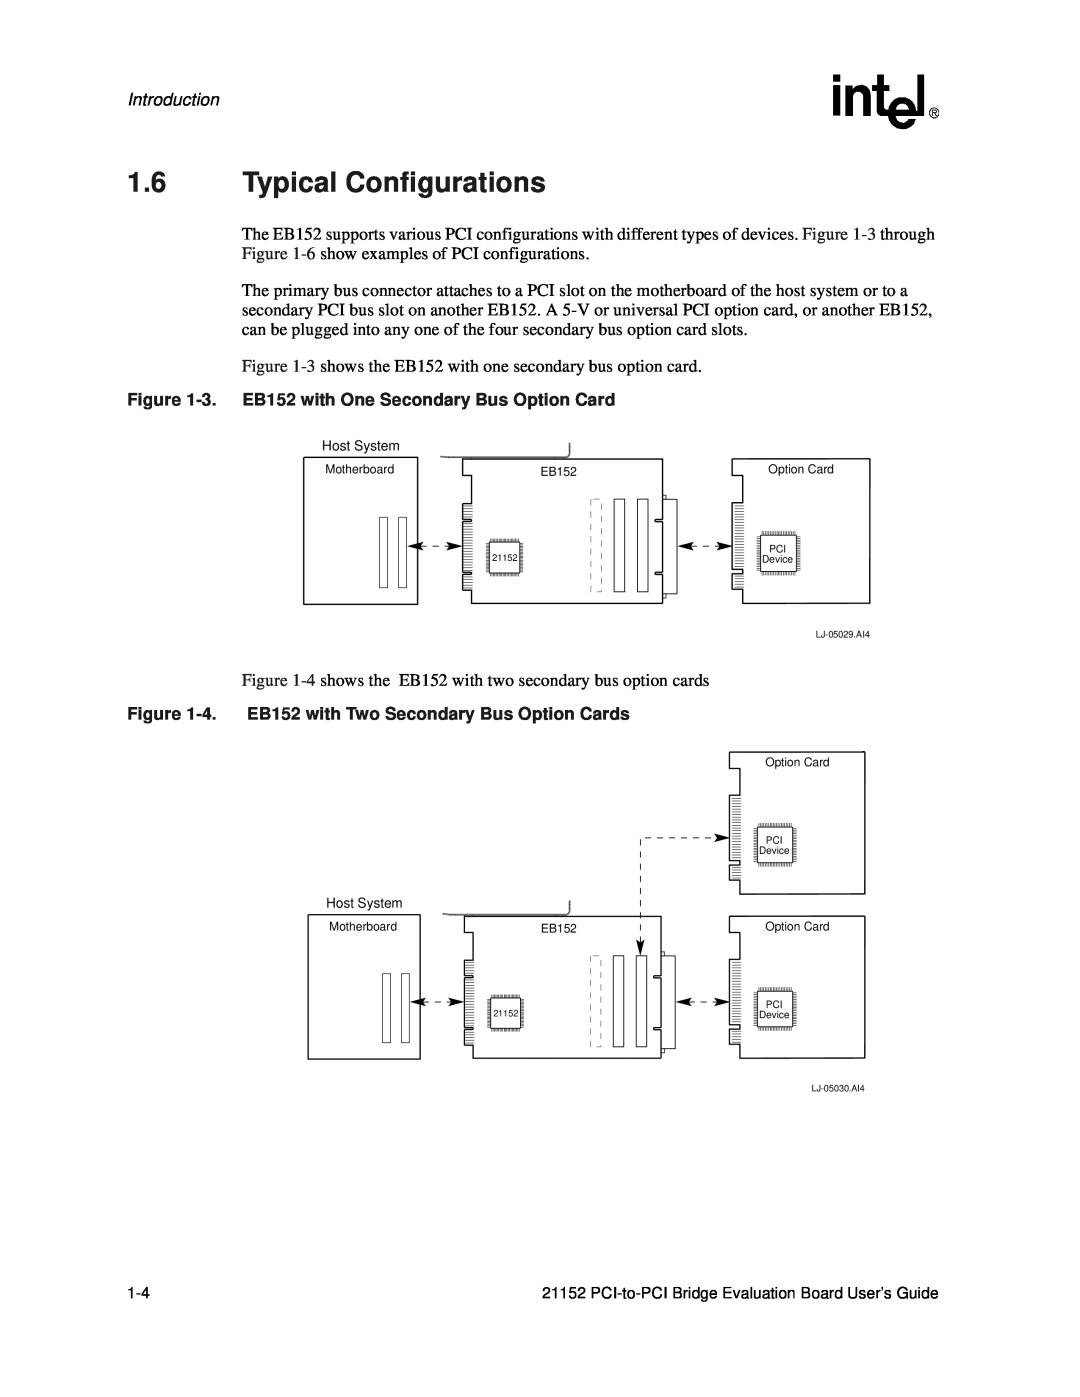 Intel 21152 manual Typical Configurations, 3. EB152 with One Secondary Bus Option Card, Introduction 